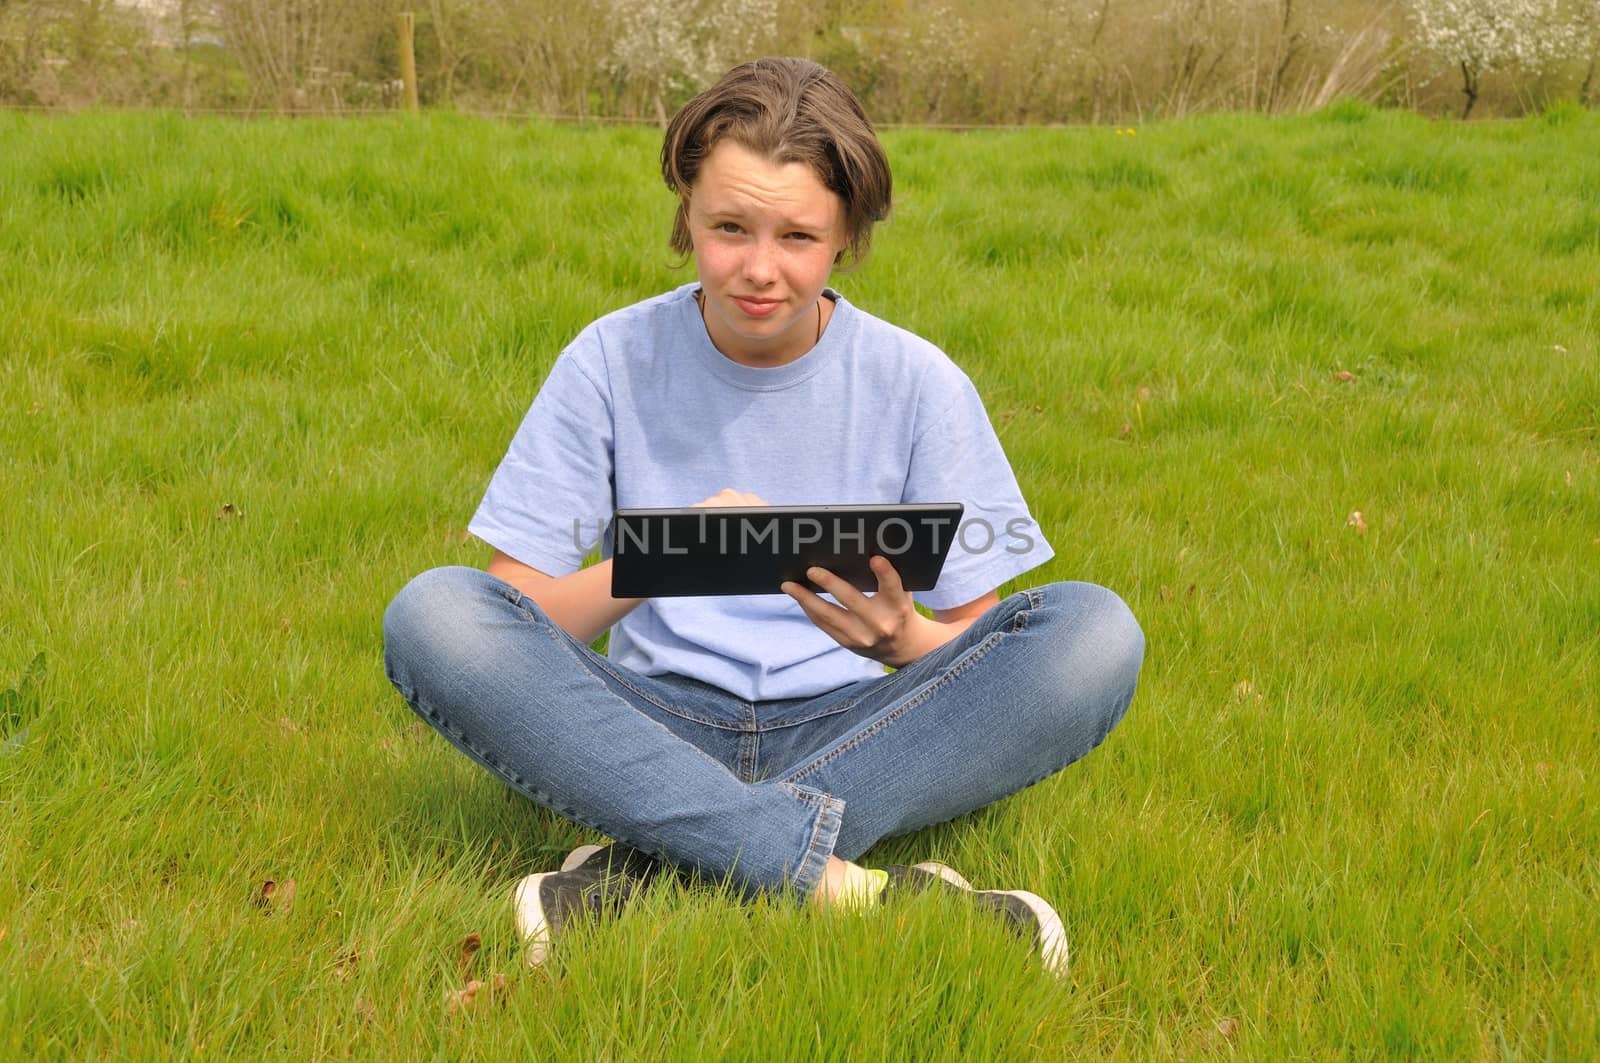 Girl sitting on the lawn and using digital tablet